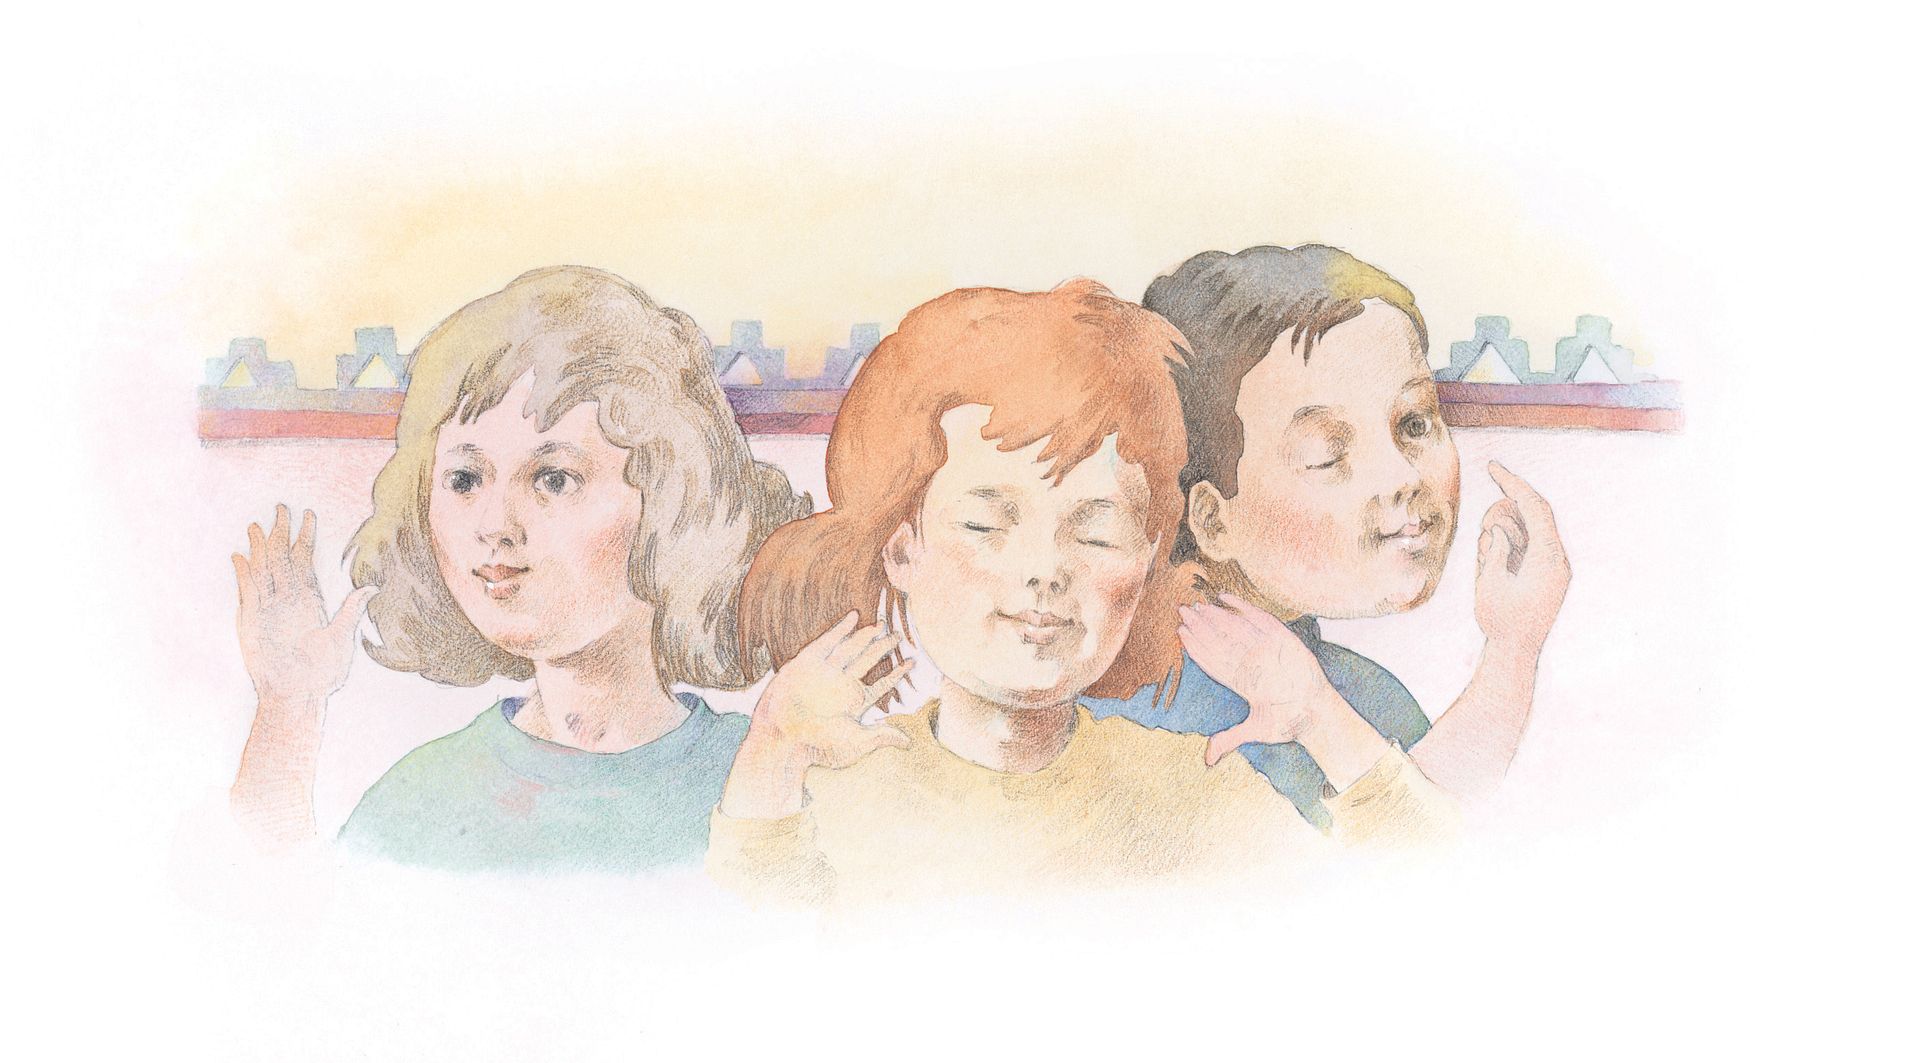 Three children close their eyes while singing a song. From the Children’s Songbook, page 268, “Two Little Eyes”; watercolor illustration by Richard Hull.